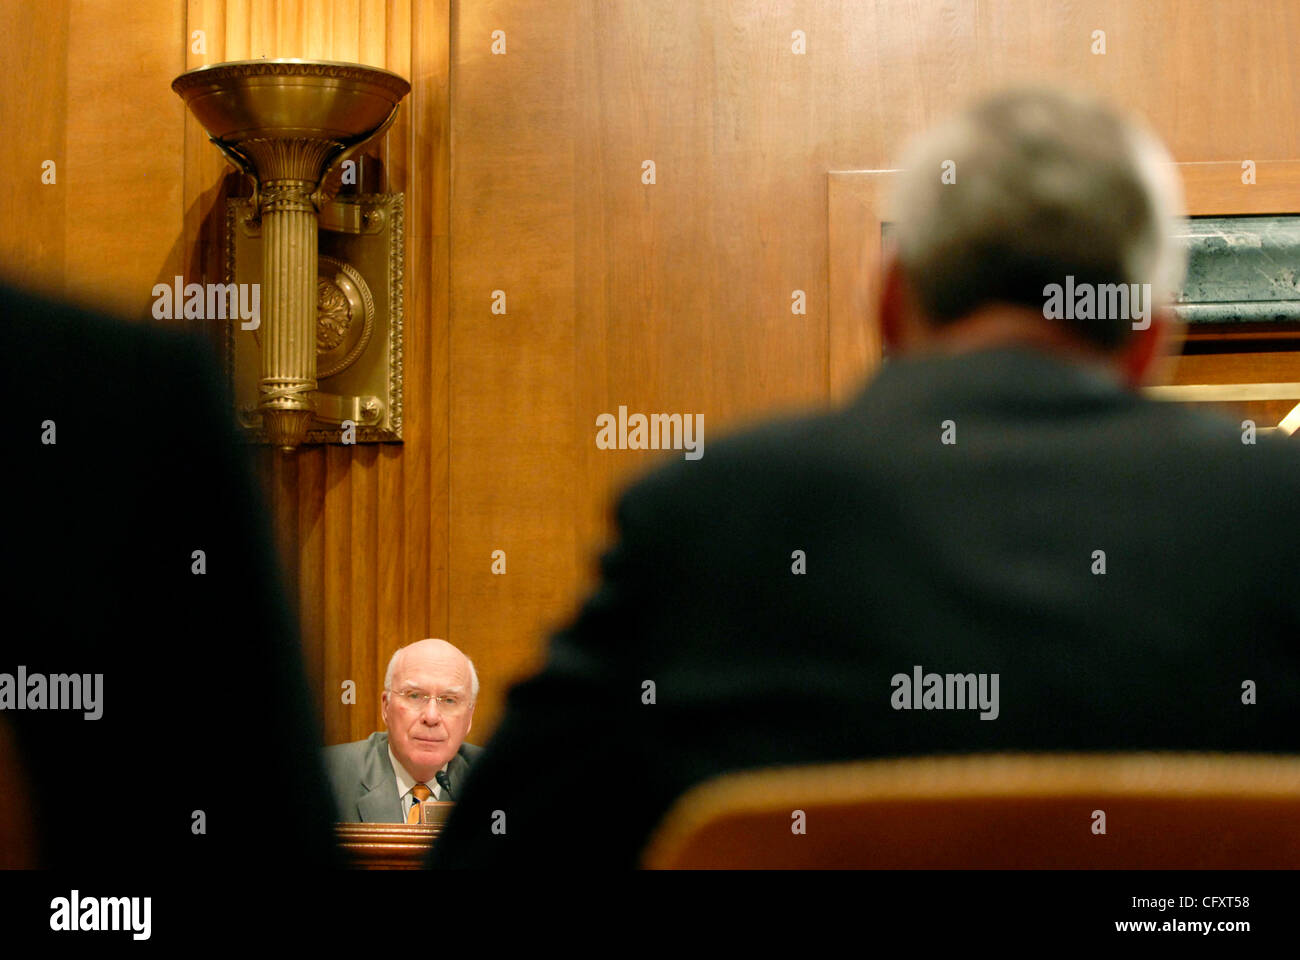 Apr 26, 2007 - Washington, DC, USA - Senator PATRICK LEAHY (D-VT) questions FBI Director ROBERT MUELLER before a Senate Appropriations Committee hearing to answer questions regarding the FBI's $6 billion budget request. Mueller faced tough questions from Senators of both parties regarding the misuse Stock Photo